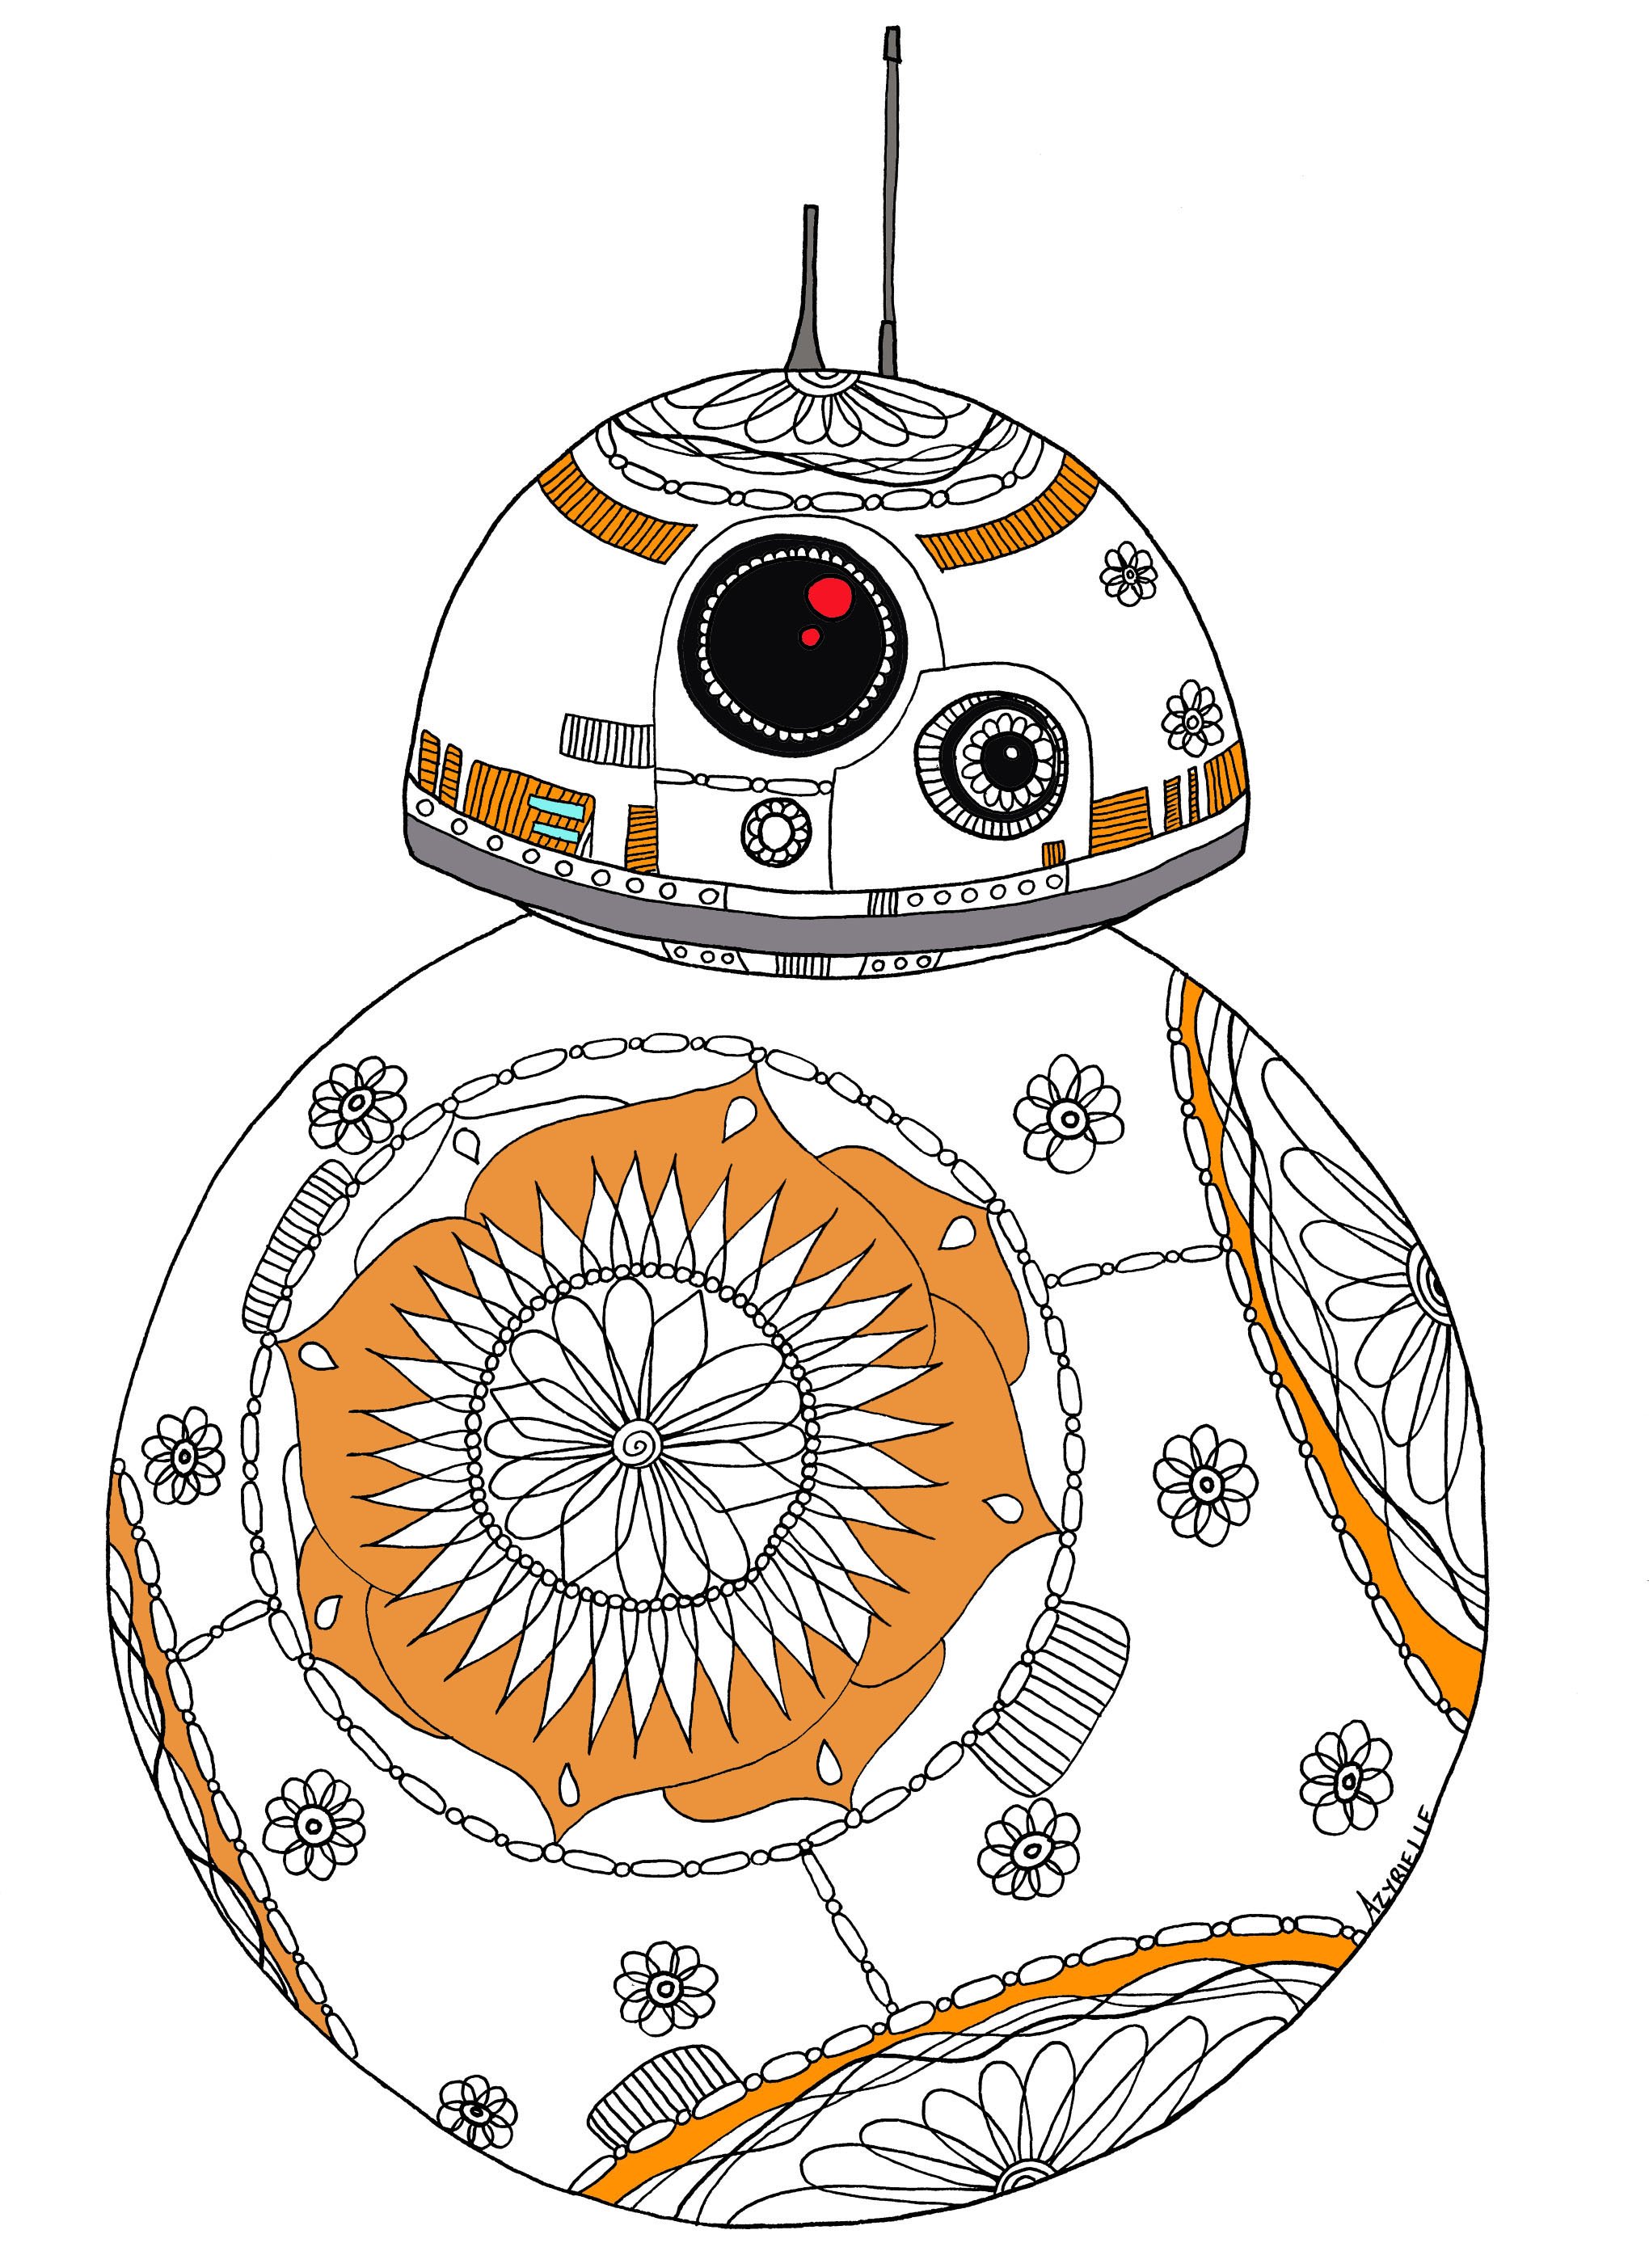 Just color on x today is star wars day go back to the fantastic universe of star wars by coloring our little droid bb created by azyrielle ð you can find all